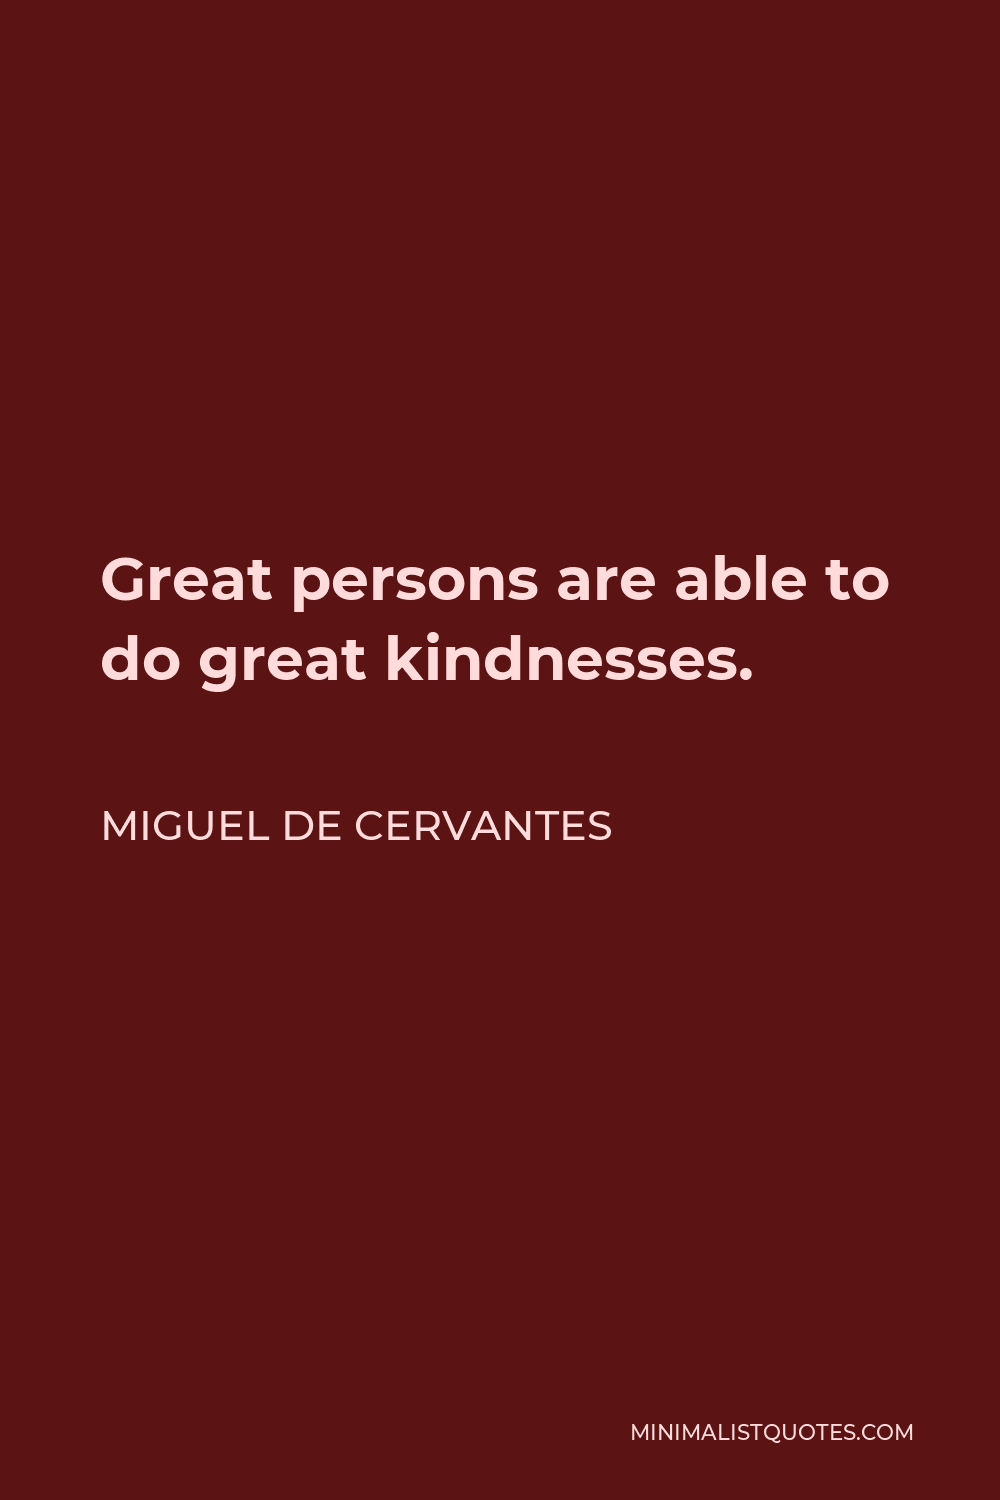 Miguel de Cervantes Quote - Great persons are able to do great kindnesses.